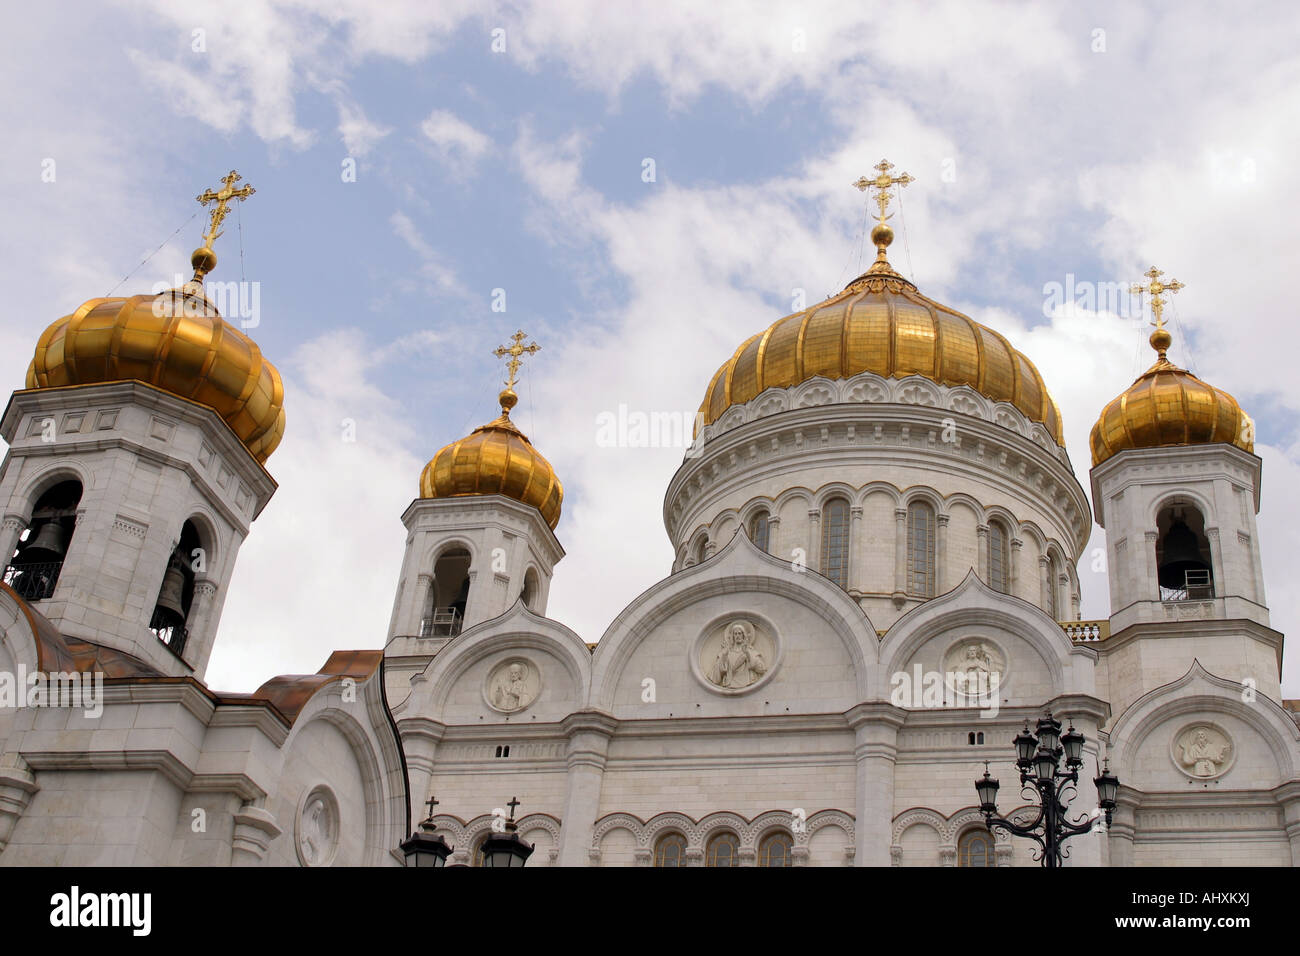 Russian othodox cathedral exterior Stock Photo